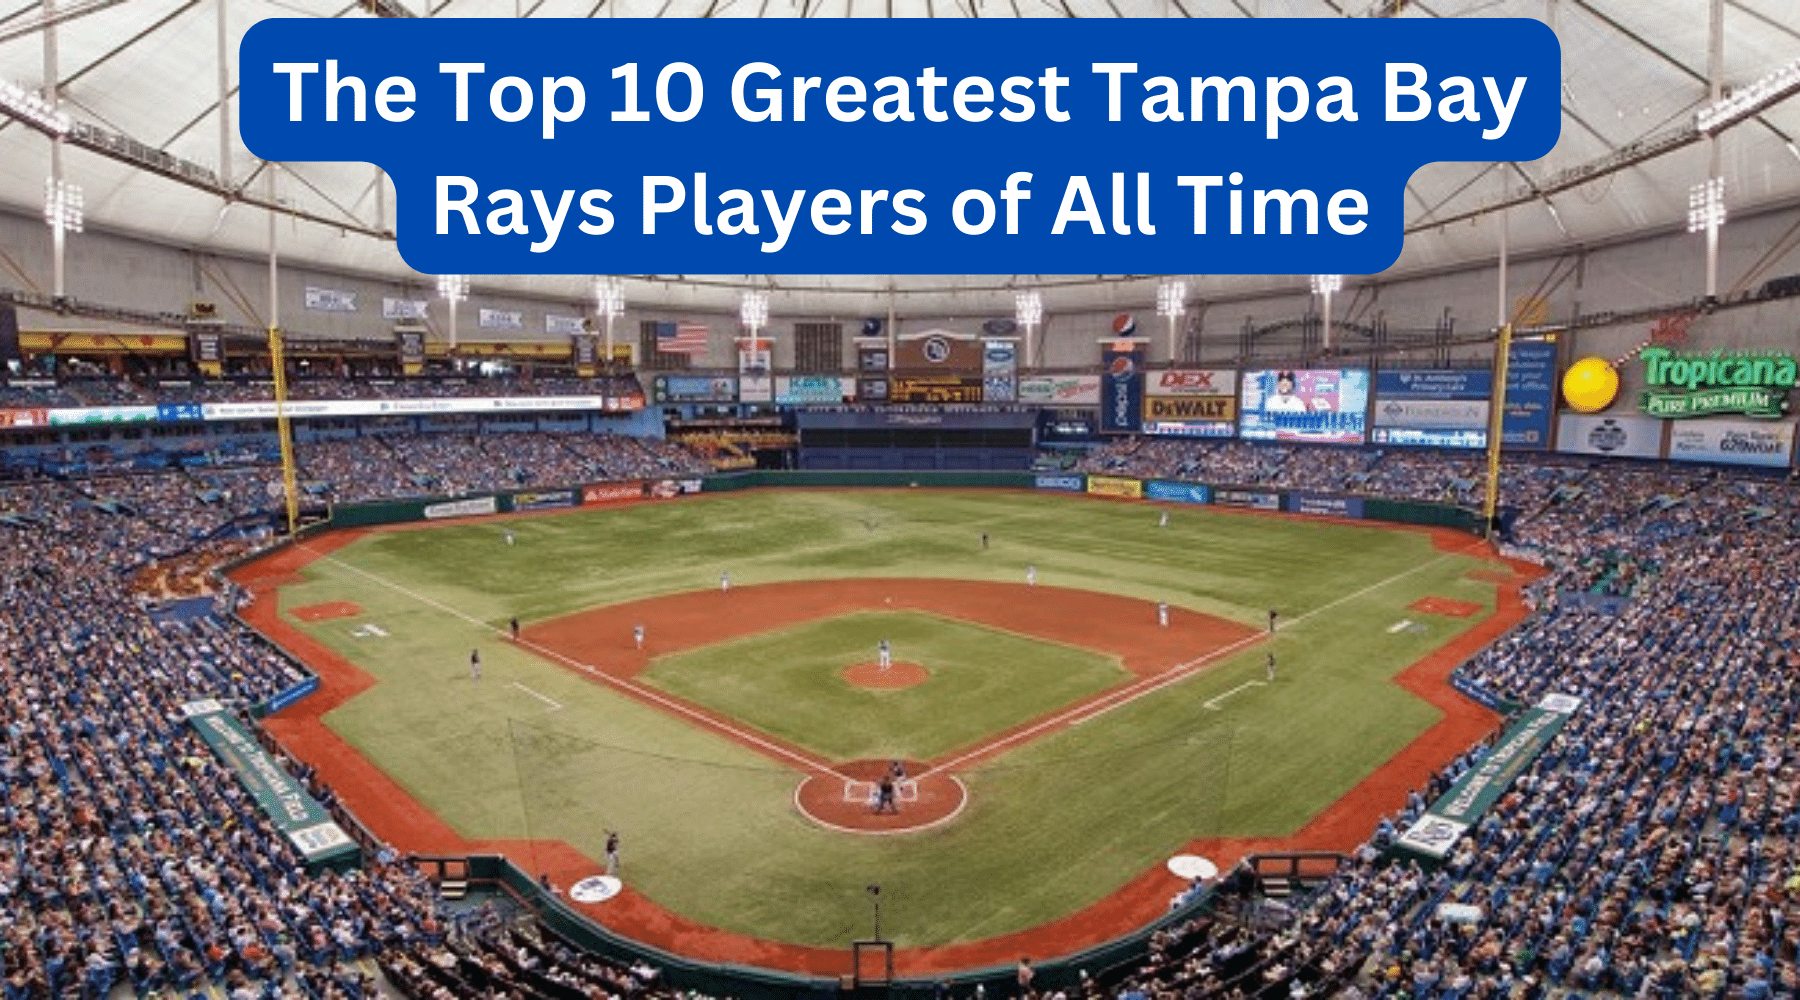 The Top 10 Greatest Tampa Bay Rays Players of All Time